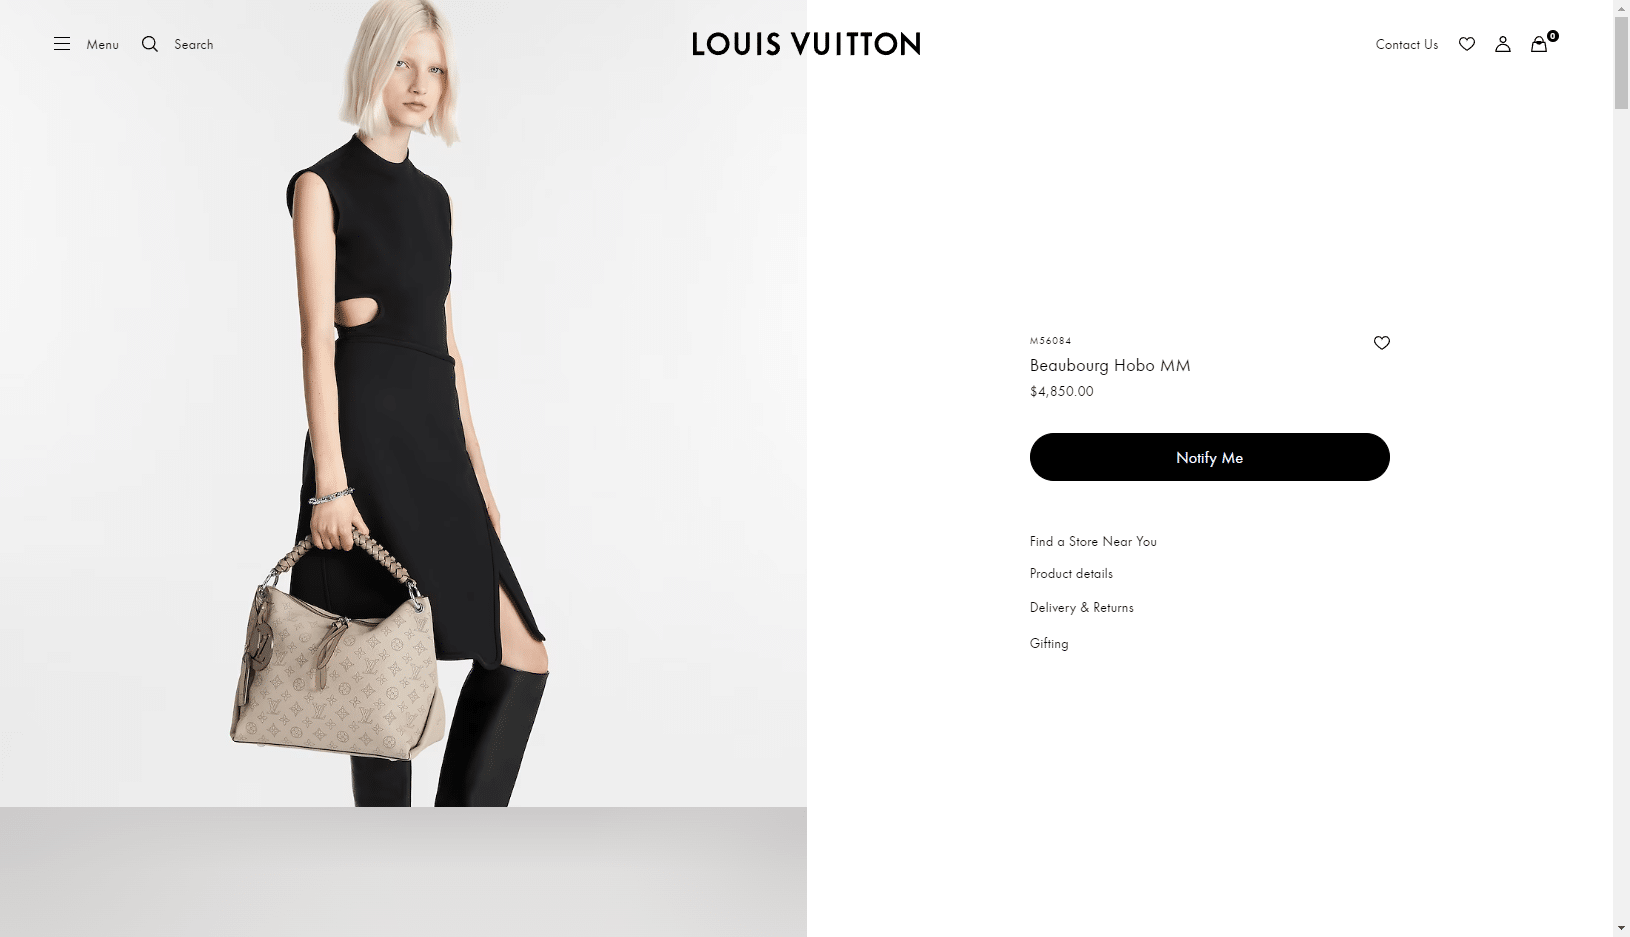 Beaubourg-Hobo-MM-Black-Leather-Hobo-Bag-LOUIS-VUITTON-.png